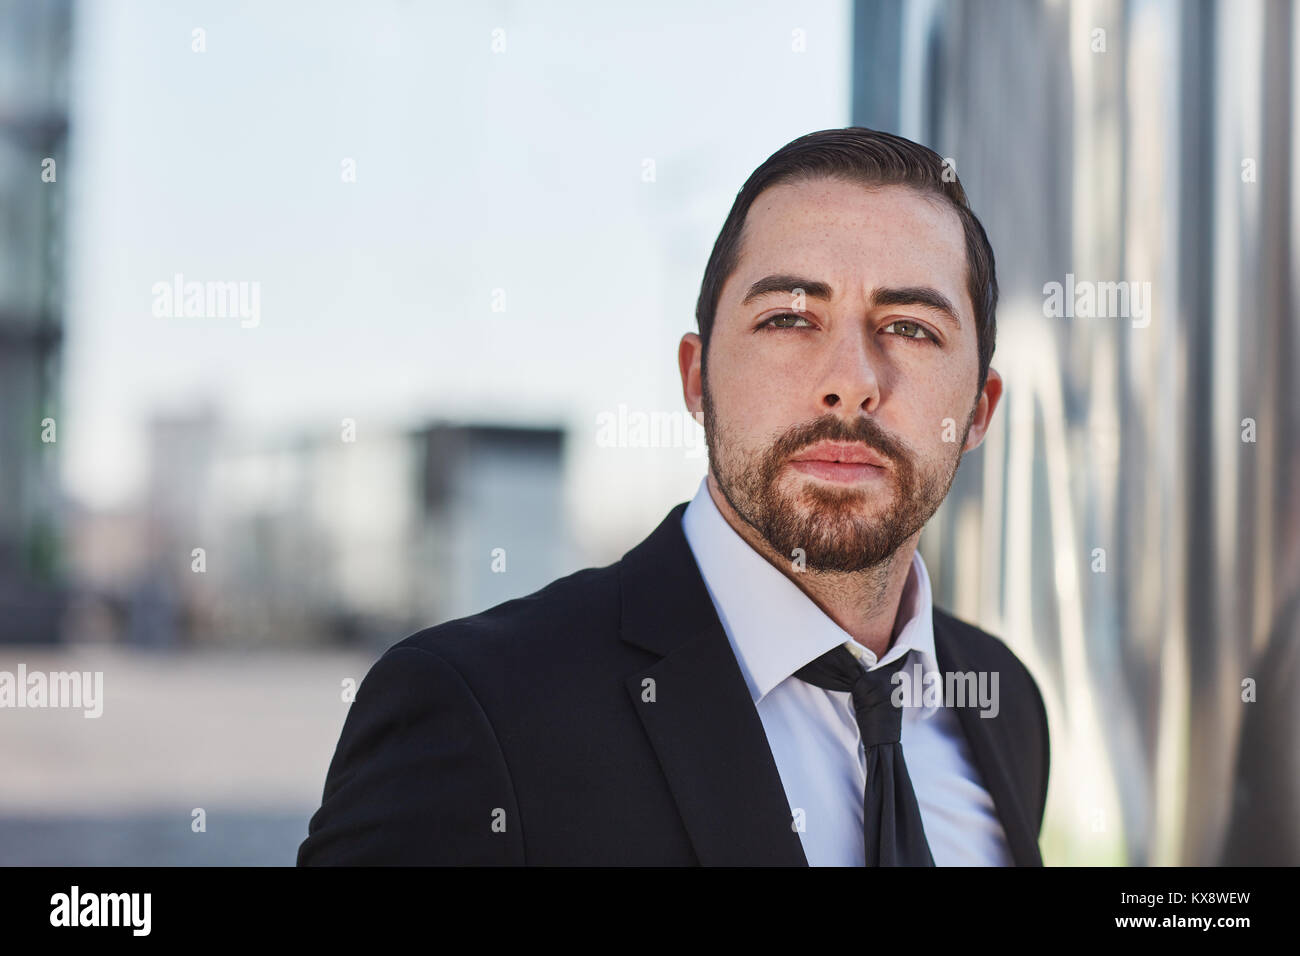 Man as a start-up Entrepreneur with responsibility has a vision Stock Photo